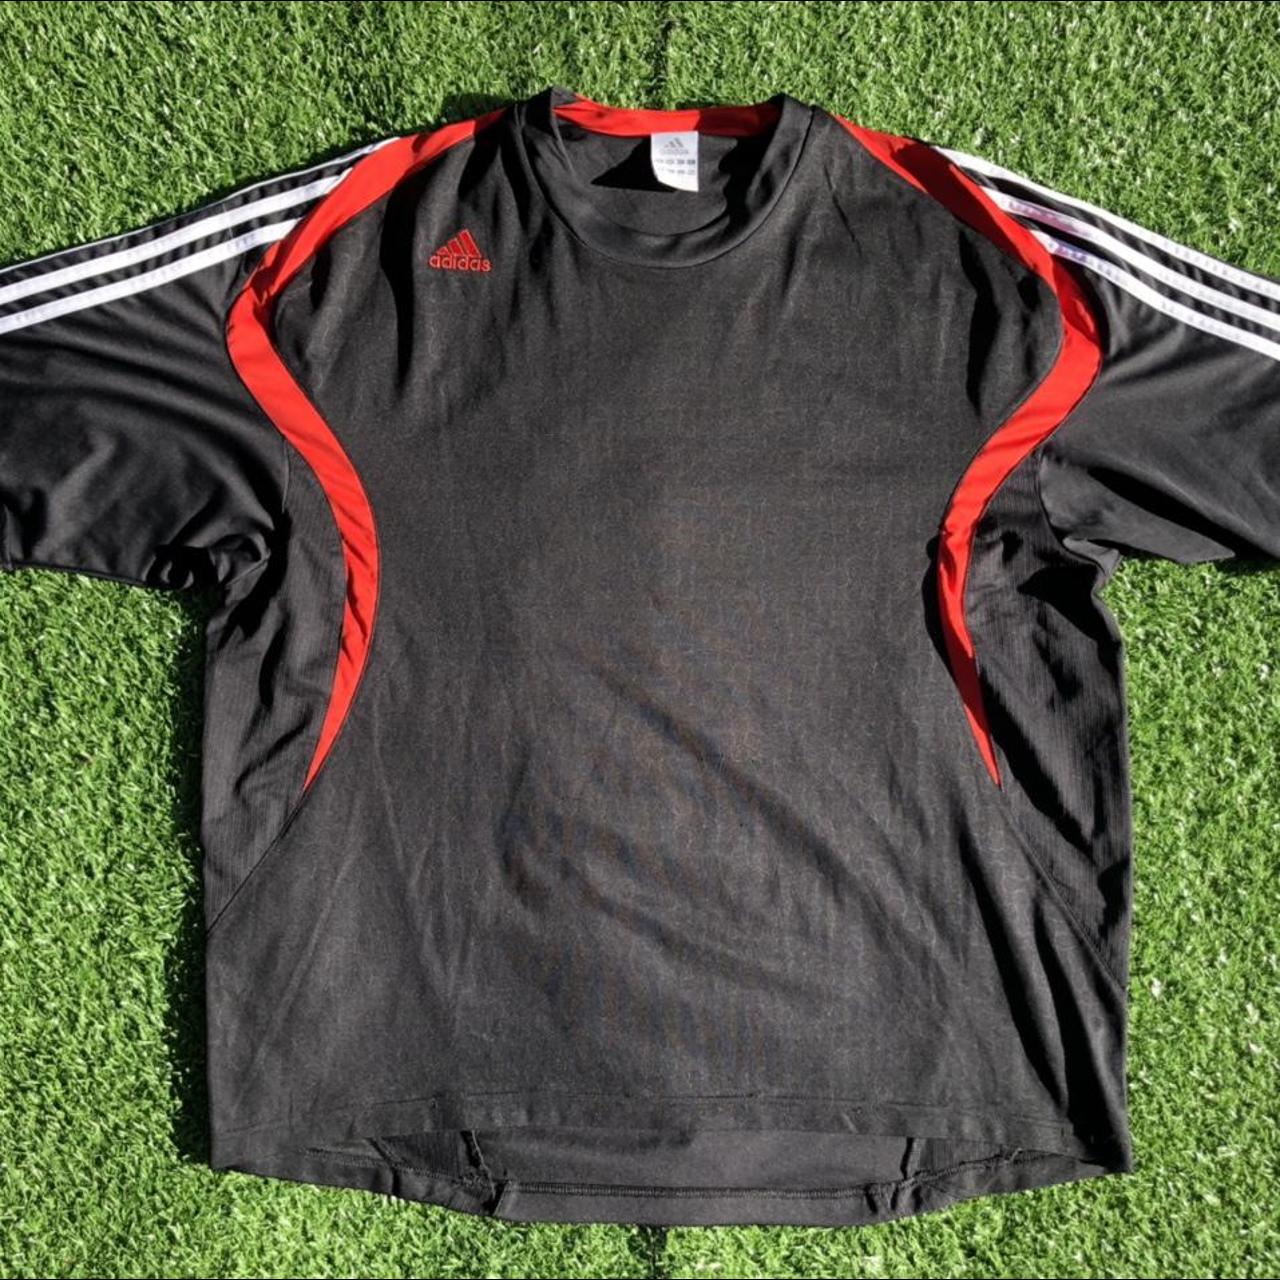 Product Image 1 - Adidas Climacool Sports Training Top
-